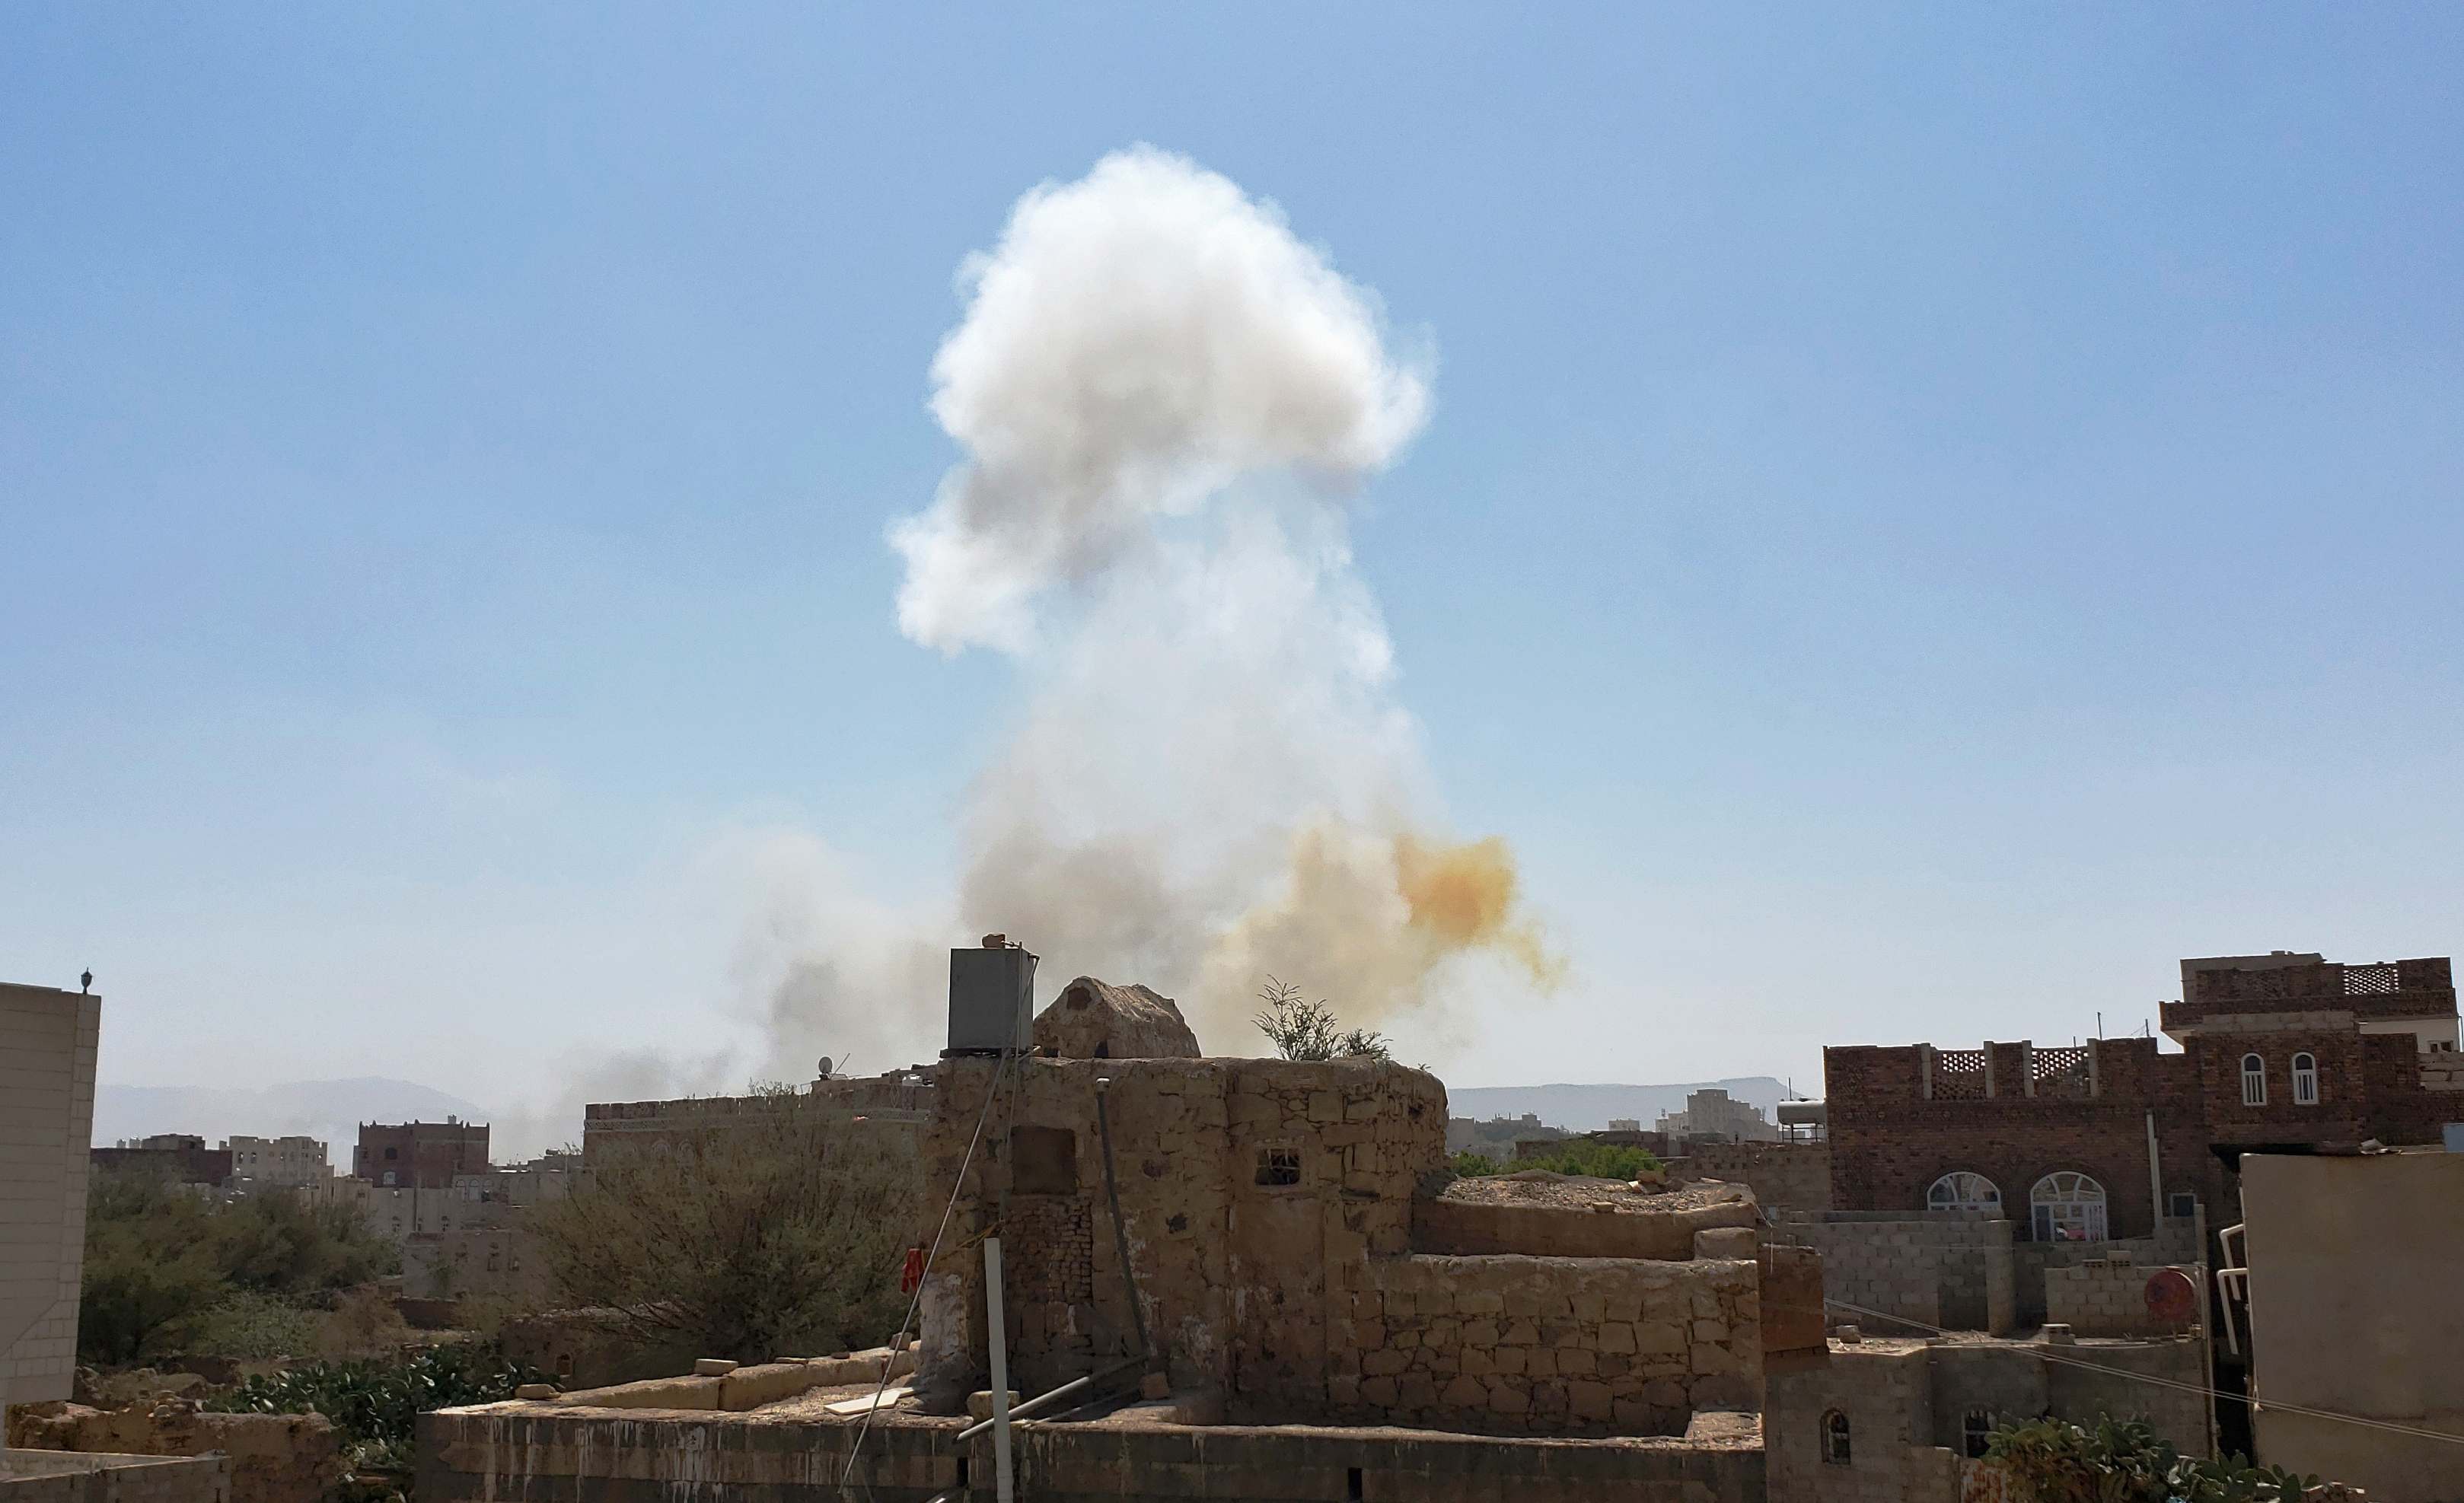 FILE - In this Mar. 7, 2021 file photo, smoke rises after Saudi-led airstrikes on an army base in Sanaa, Yemen. Saudi Arabia announced a plan Monday, March 22, 2021, to offer Yemen's Houthi rebels a cease-fire in the country's yearslong war and allow a major airport to reopen in its capital, the kingdom's latest attempt to halt fighting that has sparked the world's worst humanitarian crisis in the Arab world's poorest nation. (AP Photo/Hani Mohammed, File)